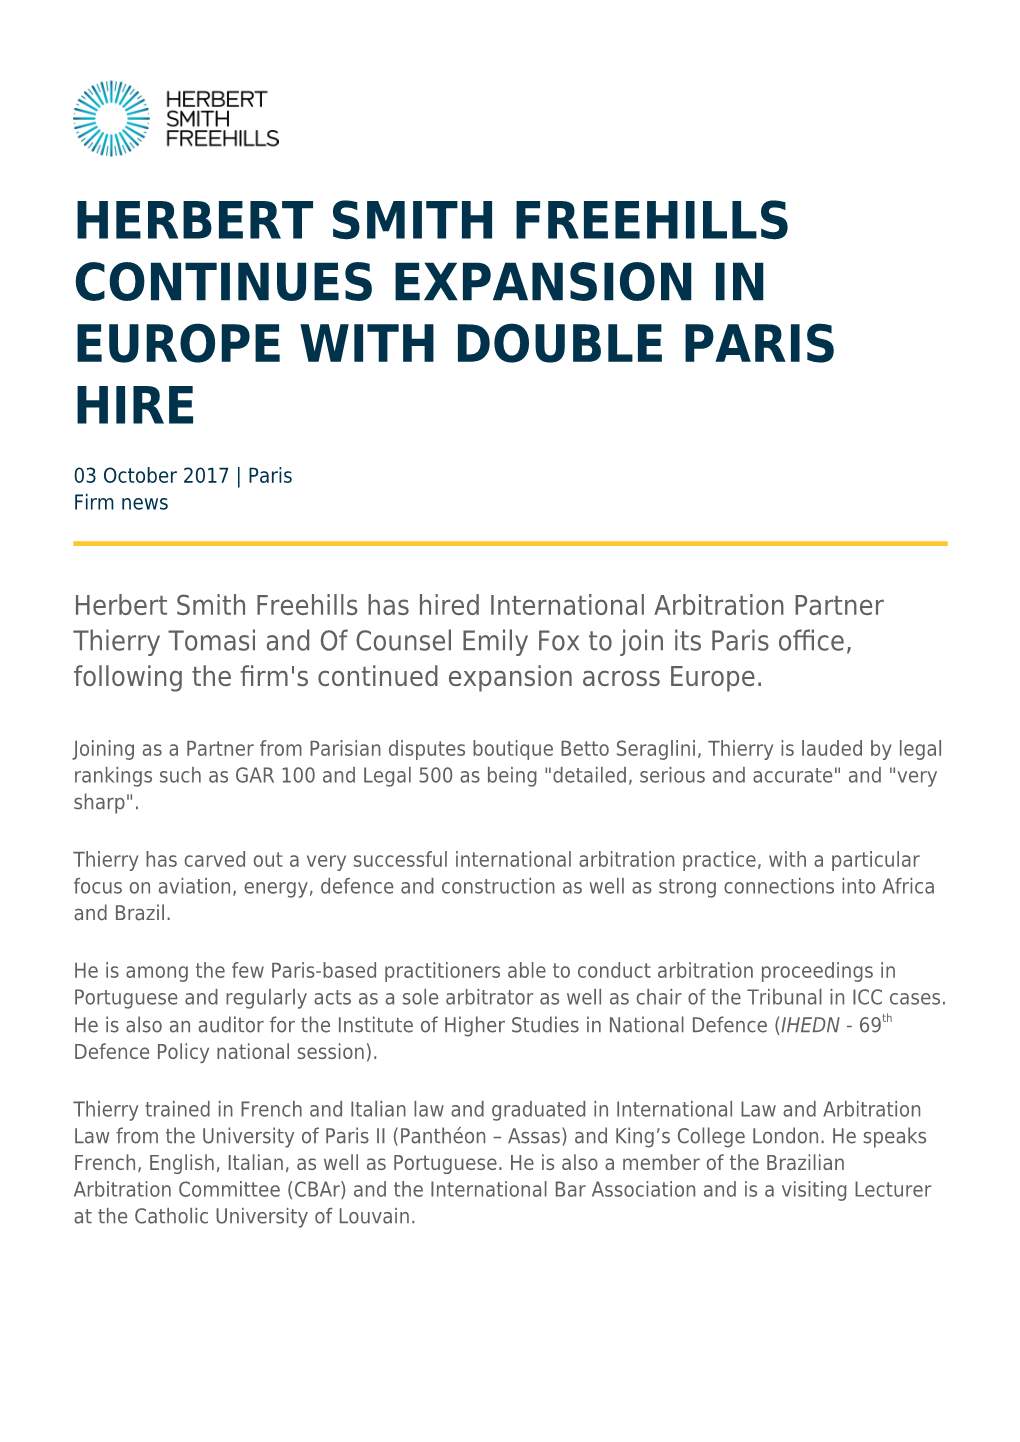 Herbert Smith Freehills Continues Expansion in Europe with Double Paris Hire